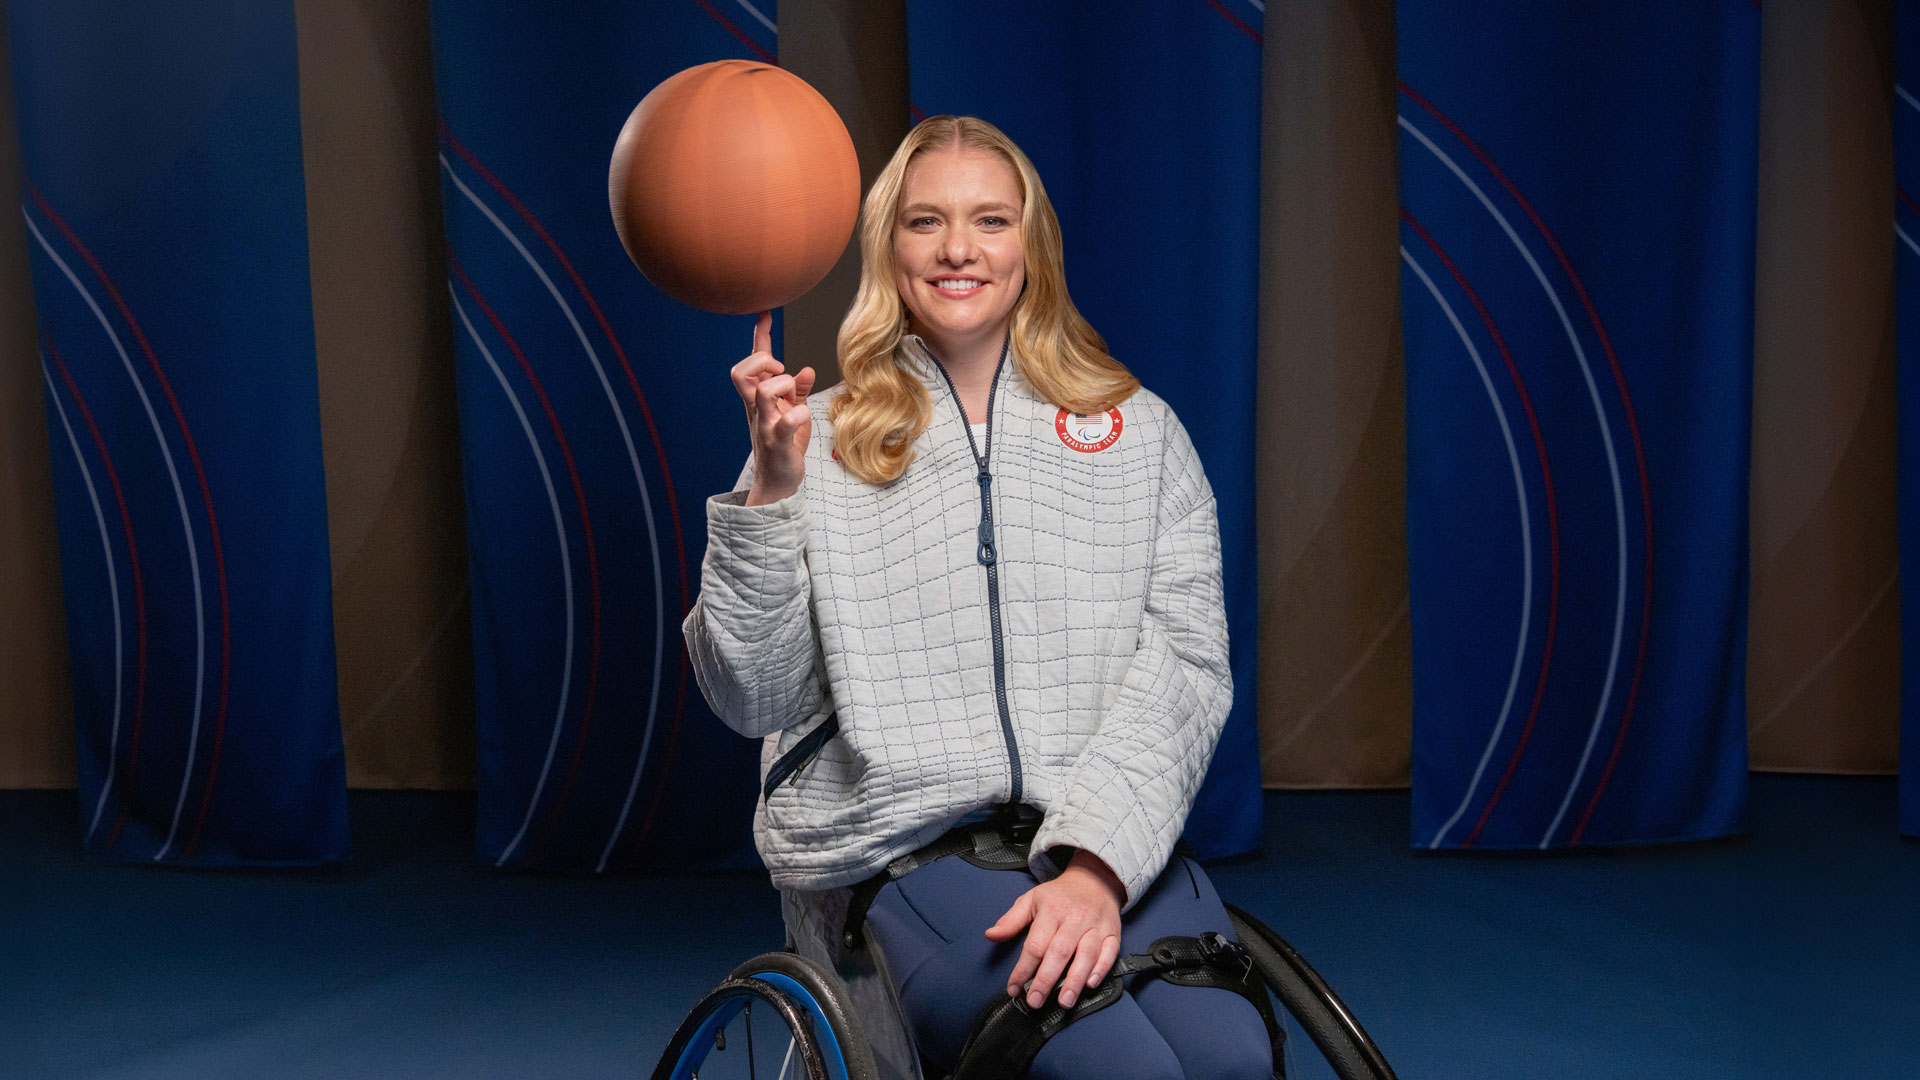 Rose Hollermann, wearing a Team USA jacket, is spinning a basketball on one finger and smiling.